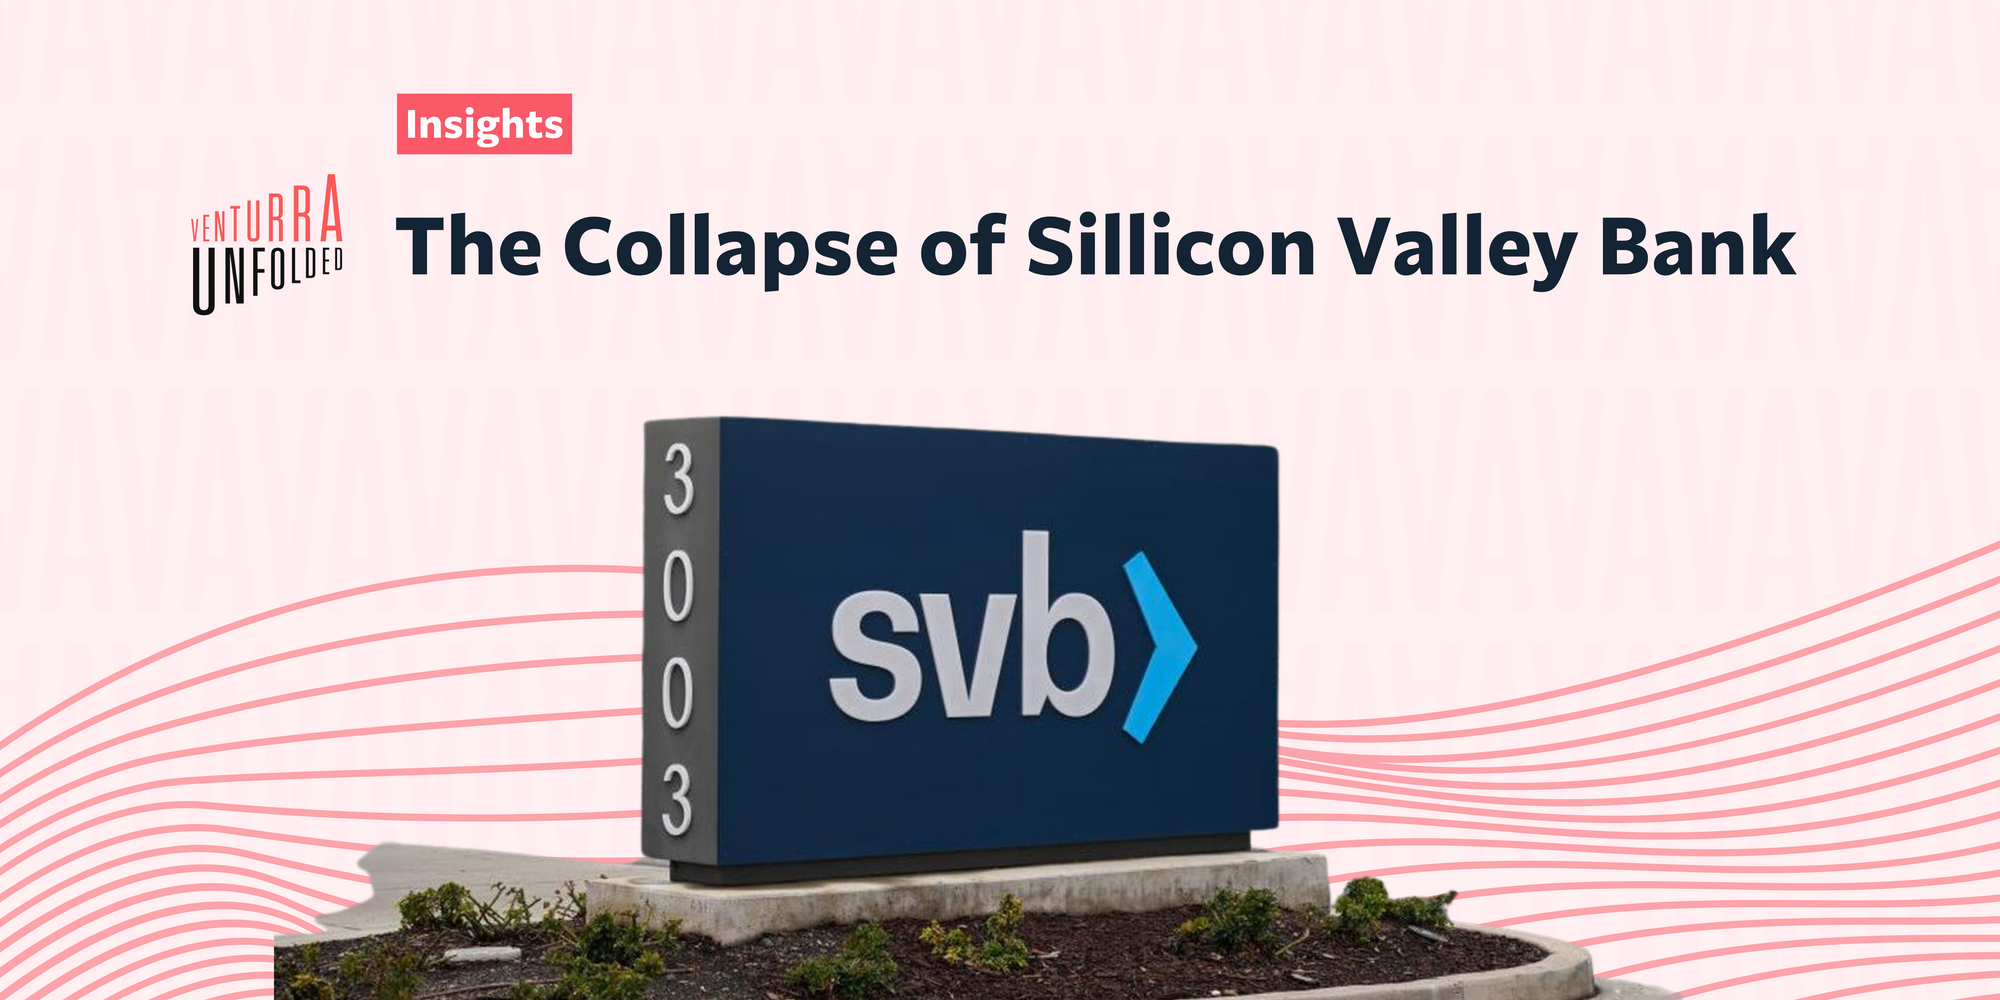 The Collapse of SVB: The Most Prominent Lenders in the Startup Ecosystem